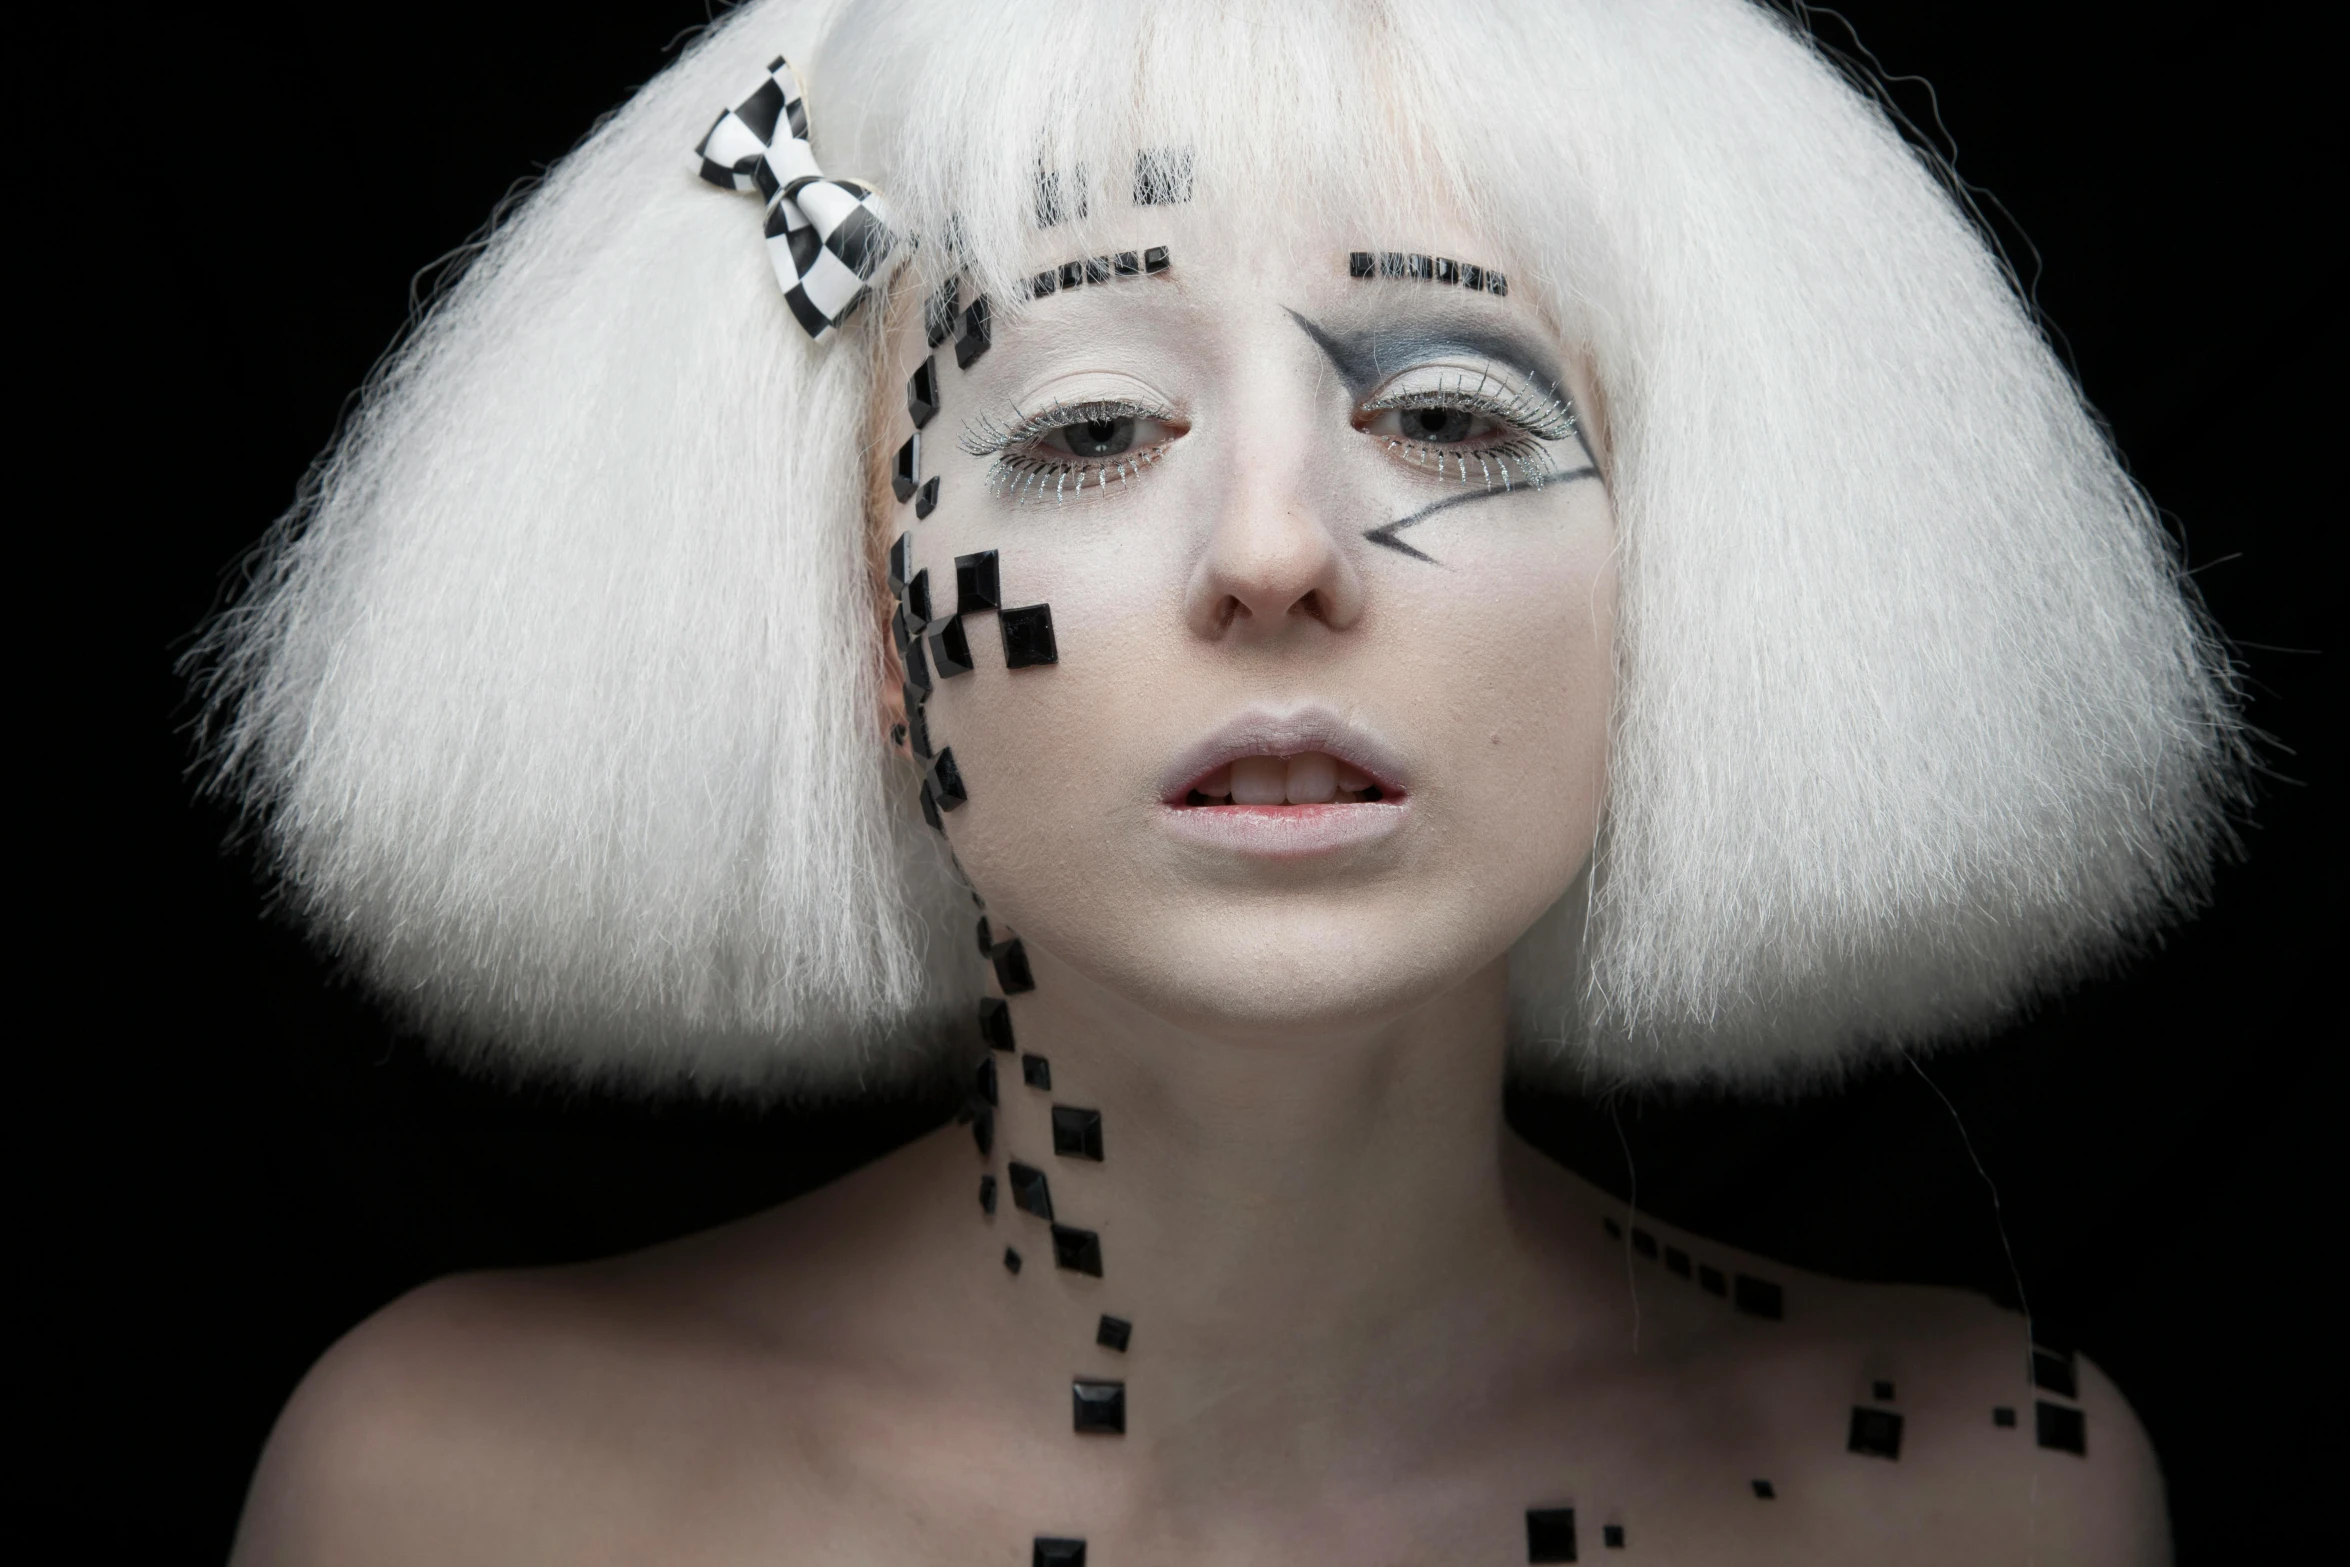 an artistic portrait with white hair and black squares on her face